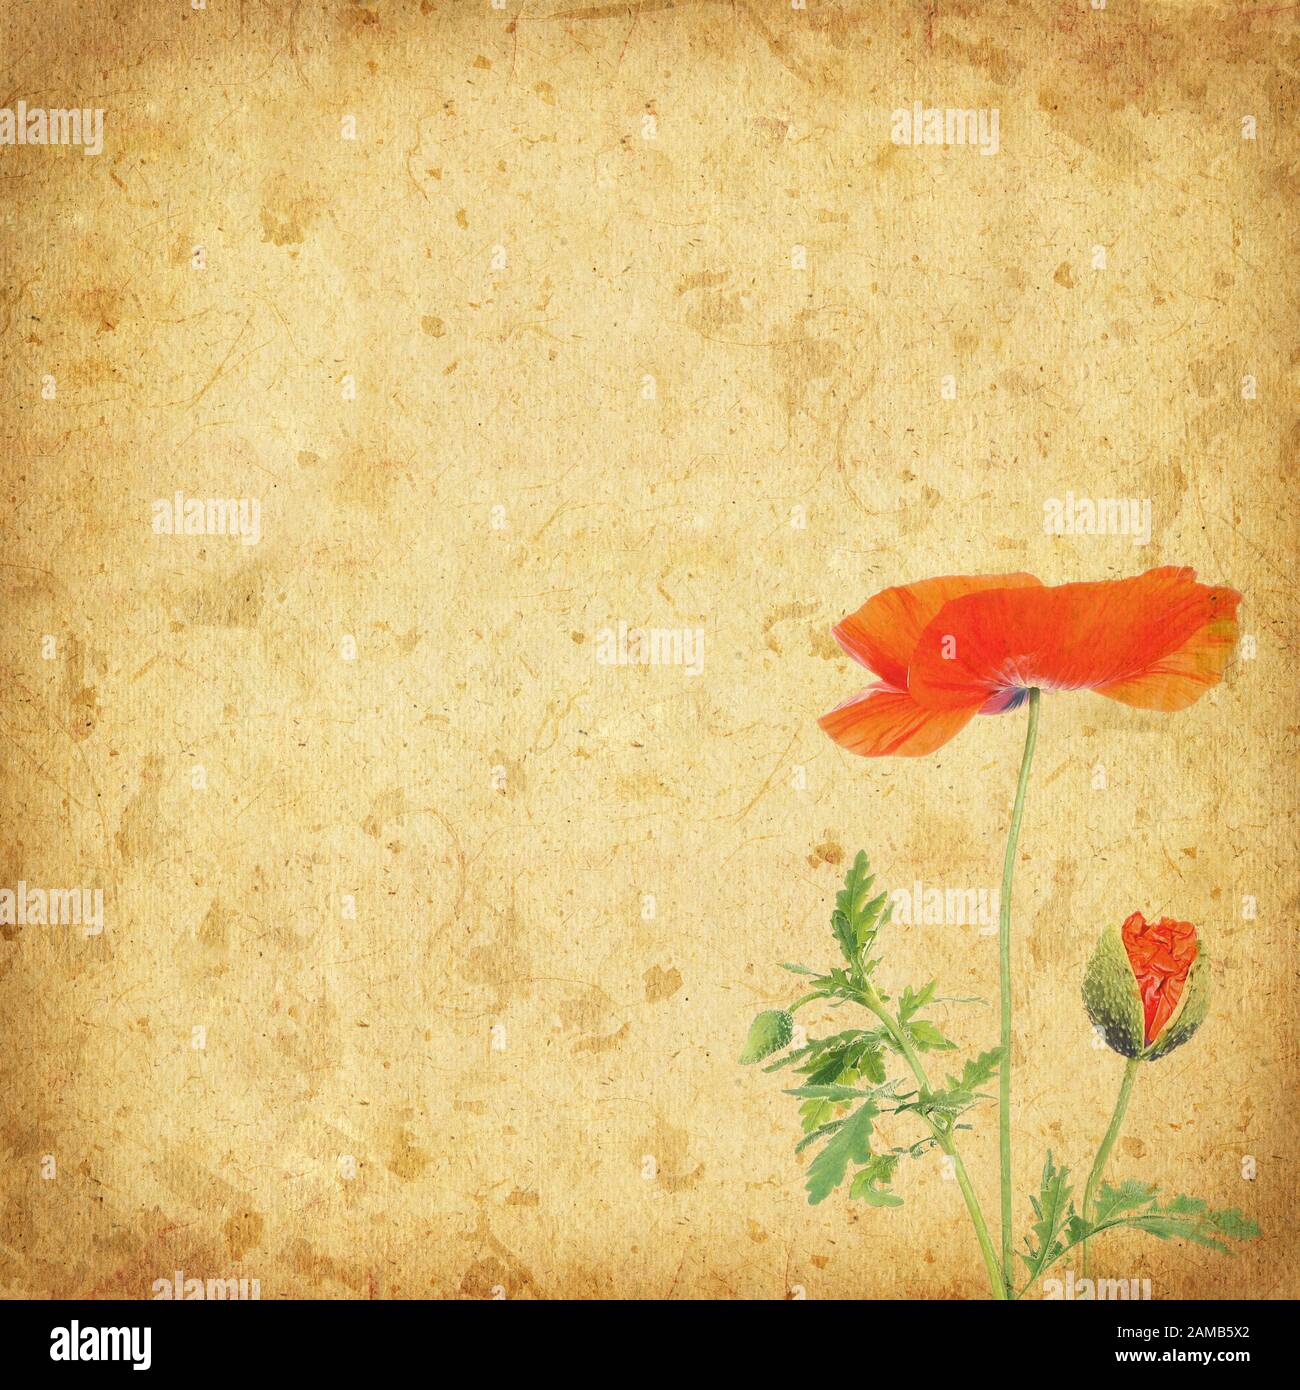 Background with corn poppy and old paper Stock Photo